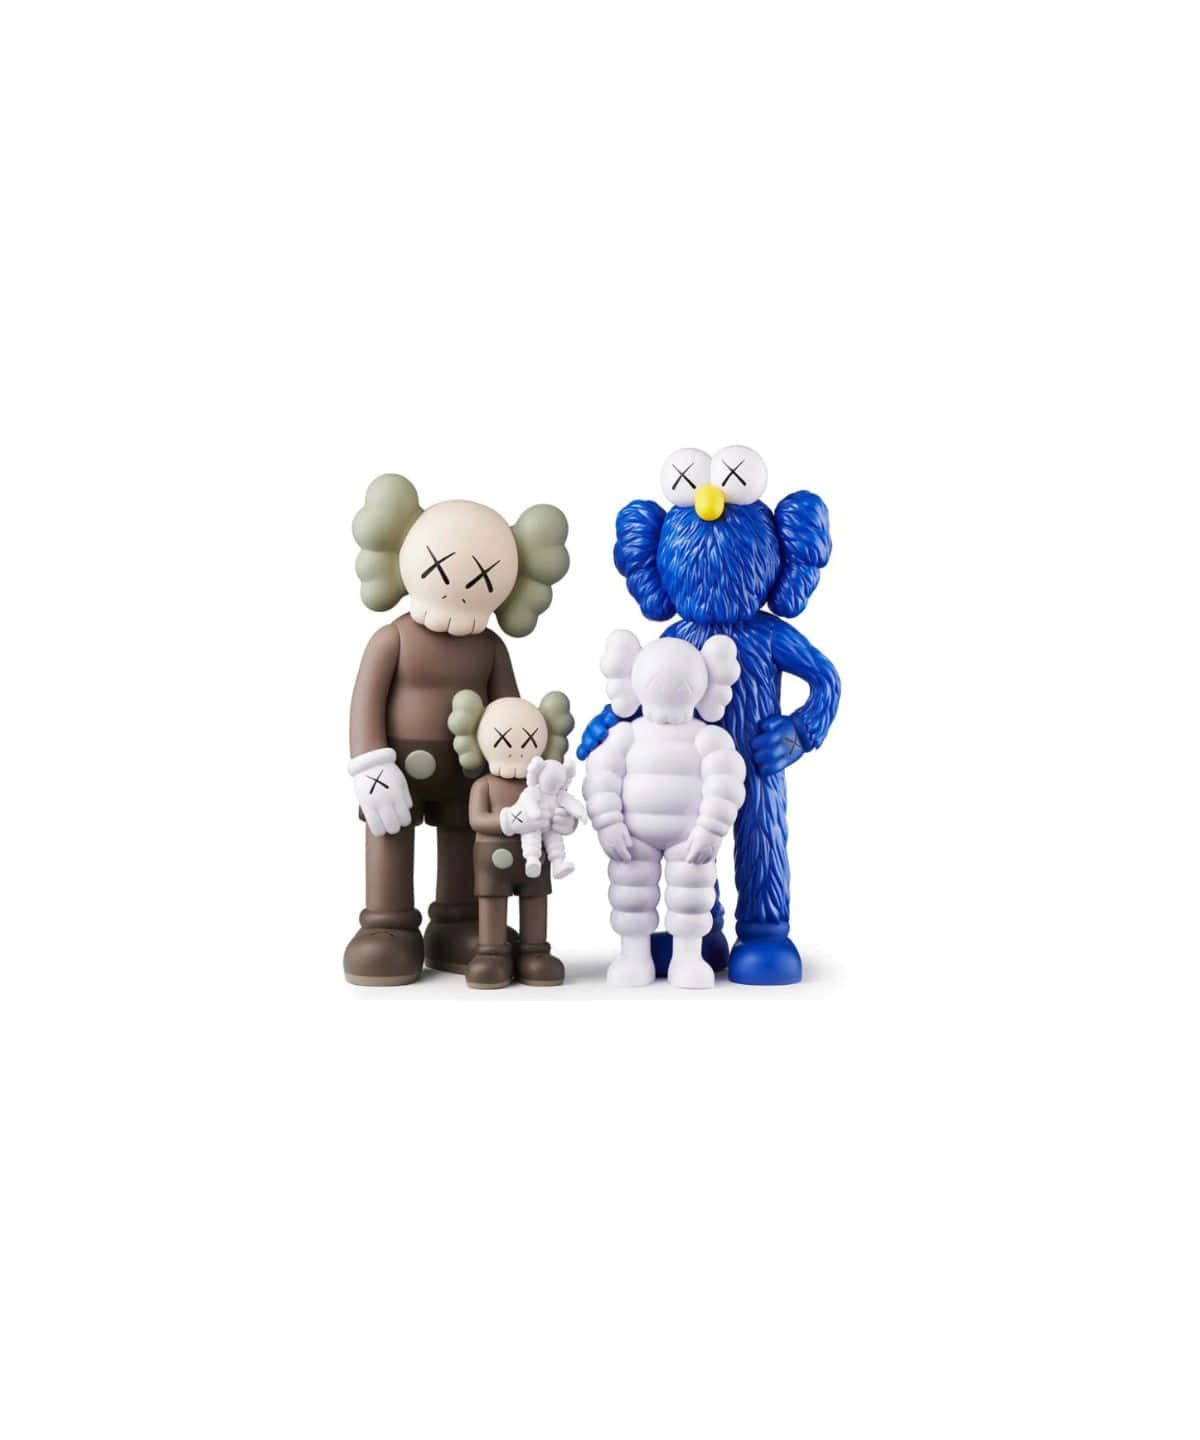 A Diverse Collection of KAWS Figures on Display Wallpaper